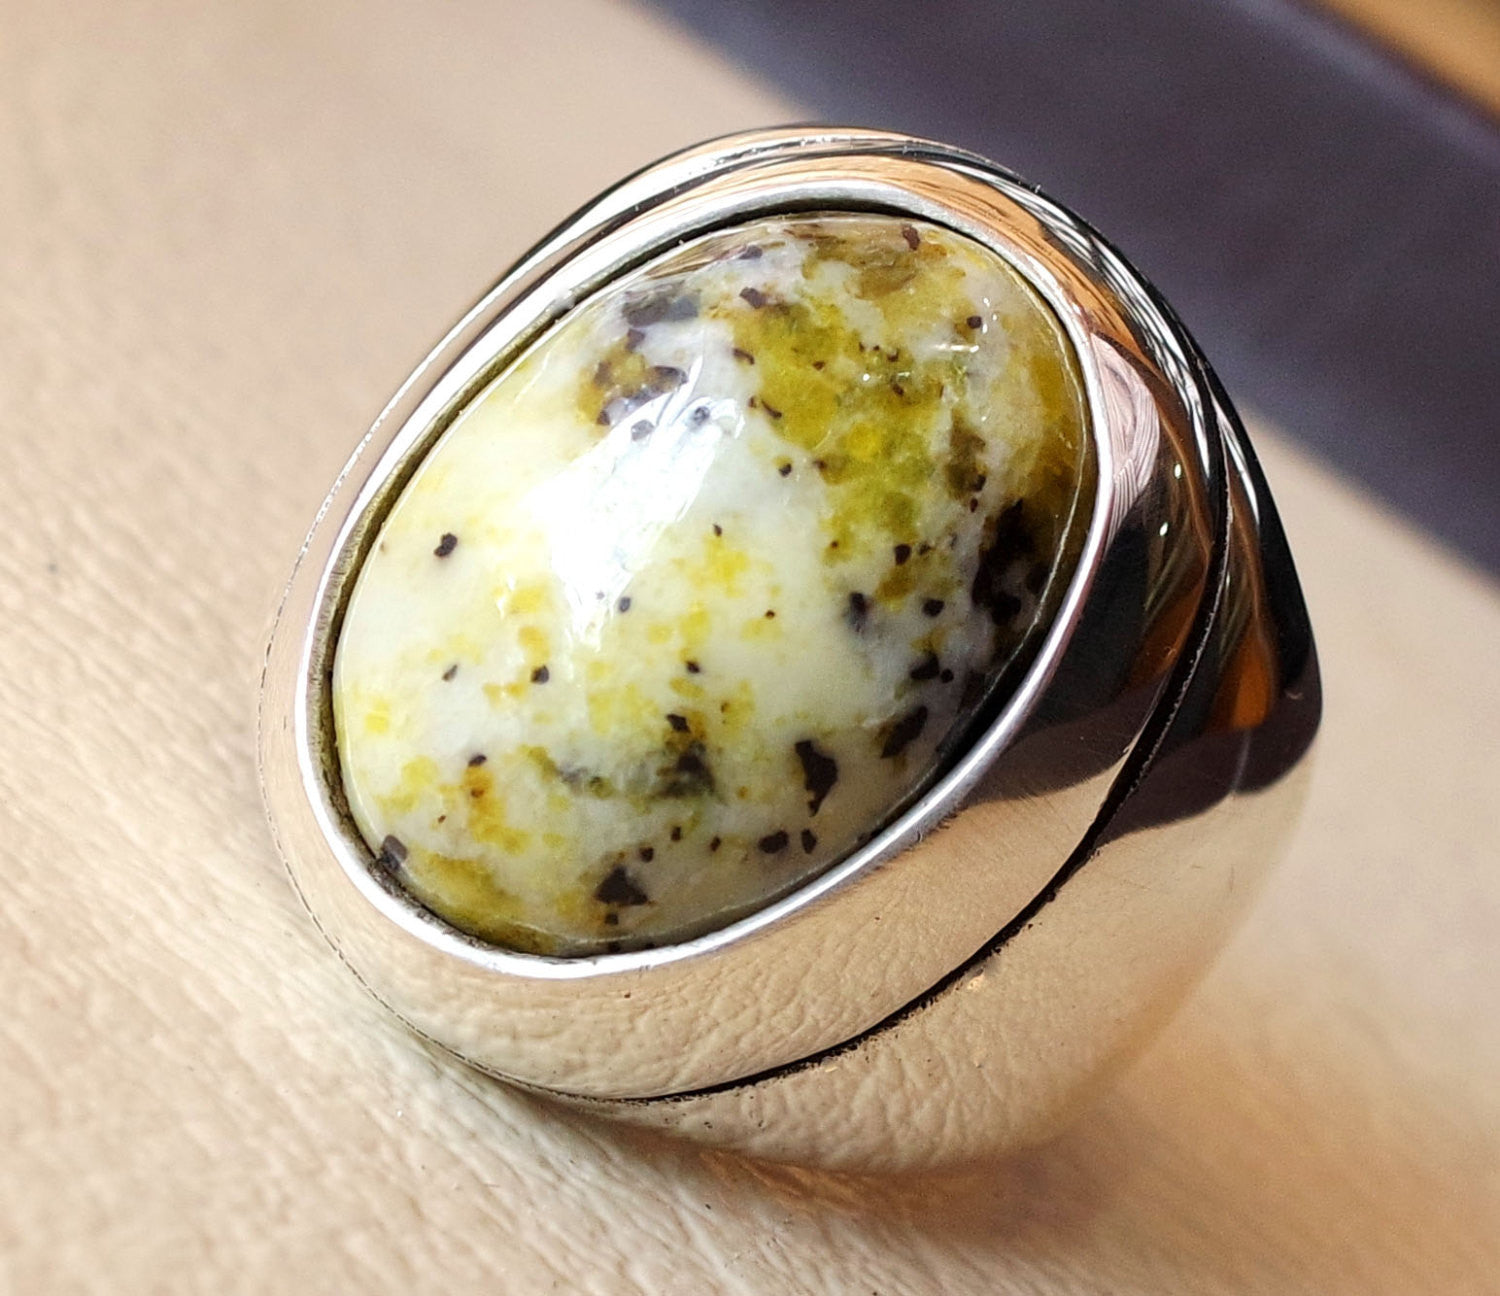 yellow dendritic grass howlite natural gem sterling silver 925 ring oval semi precious cabochon man huge ring ottoman jewelry fast shipping